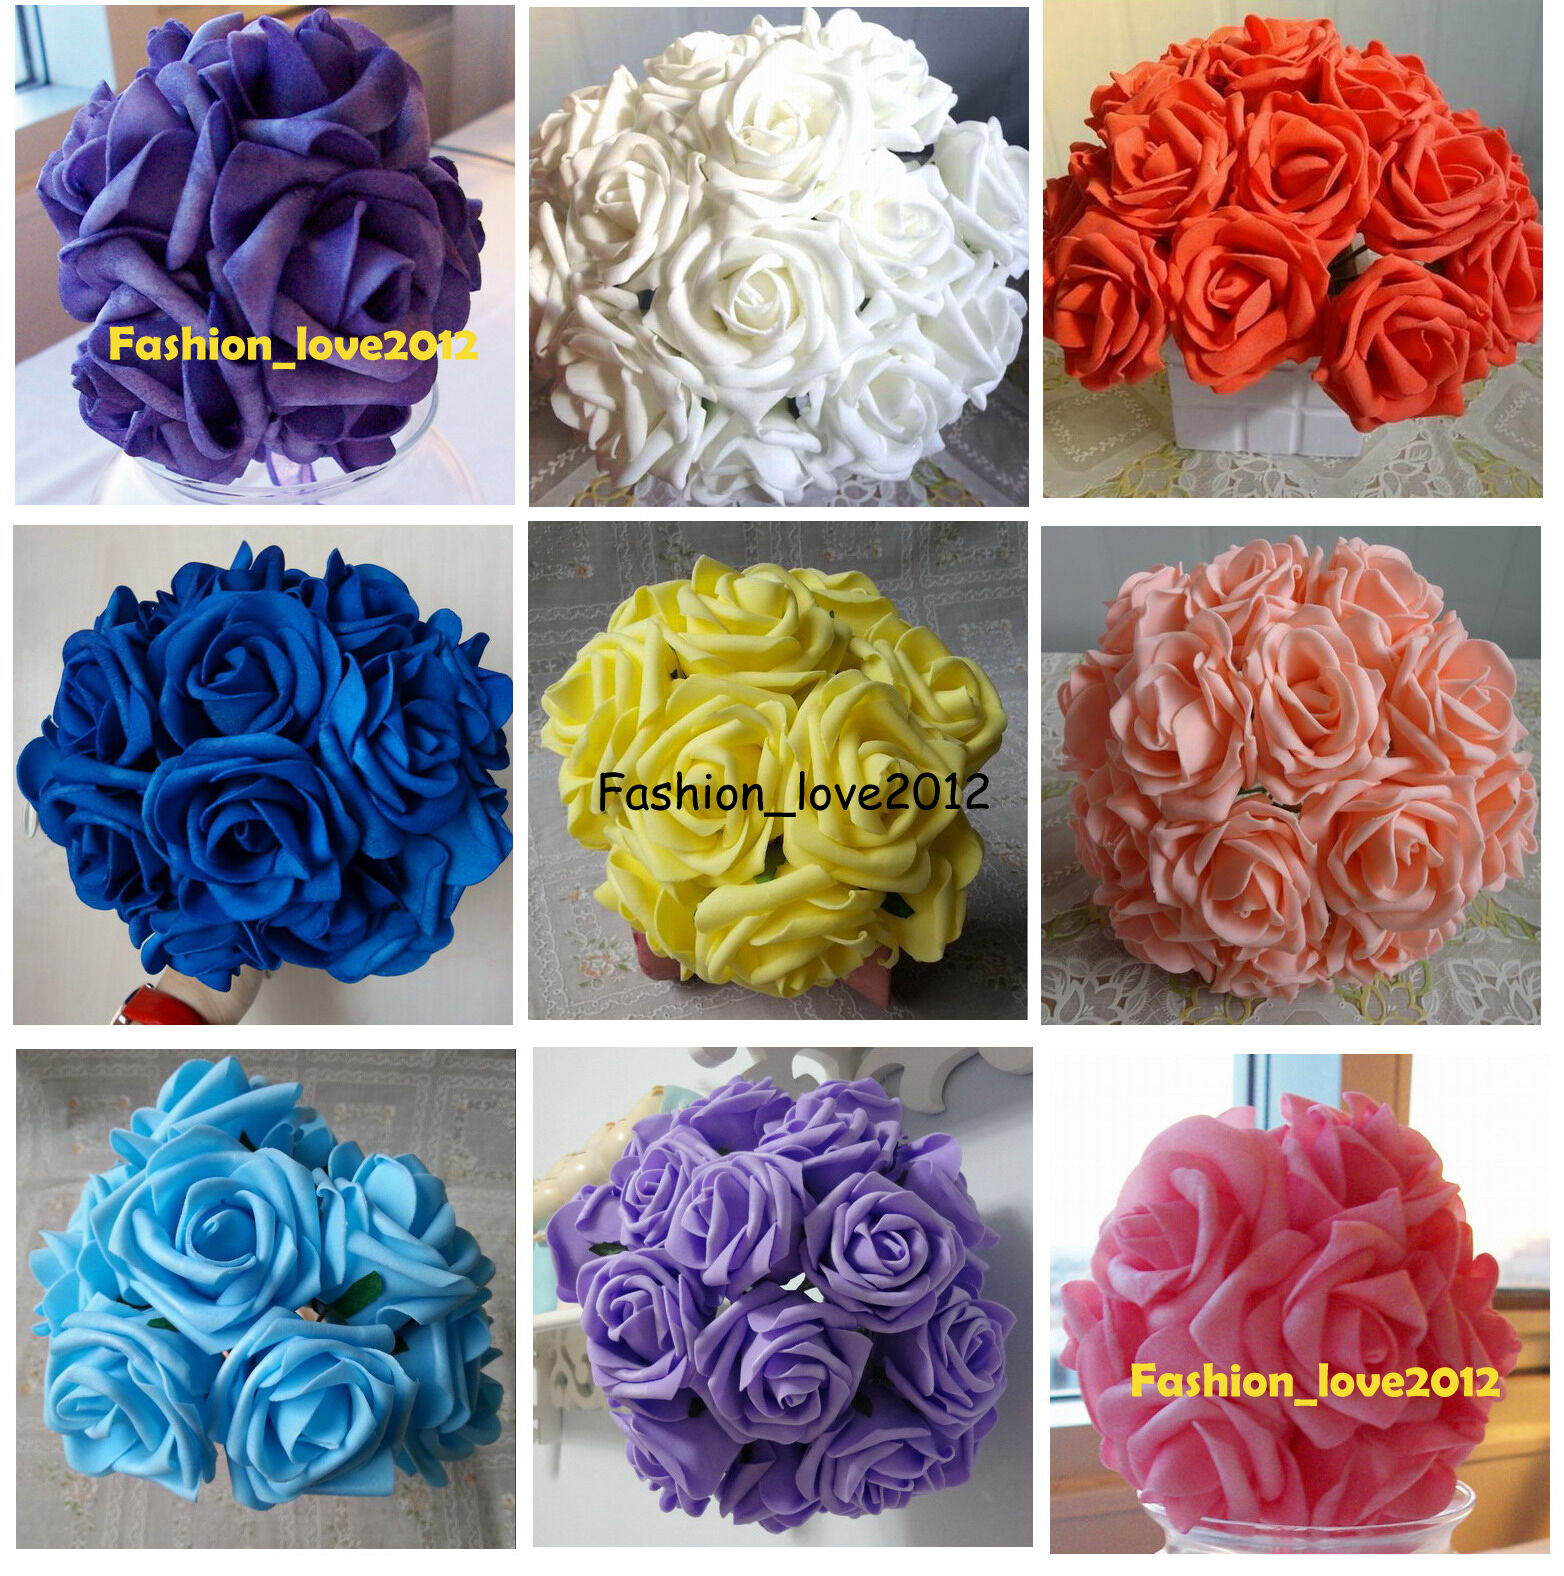 10 Fake Flowers Artificial Roses For Bridal Bouquets Wedding Floral Centerpieces